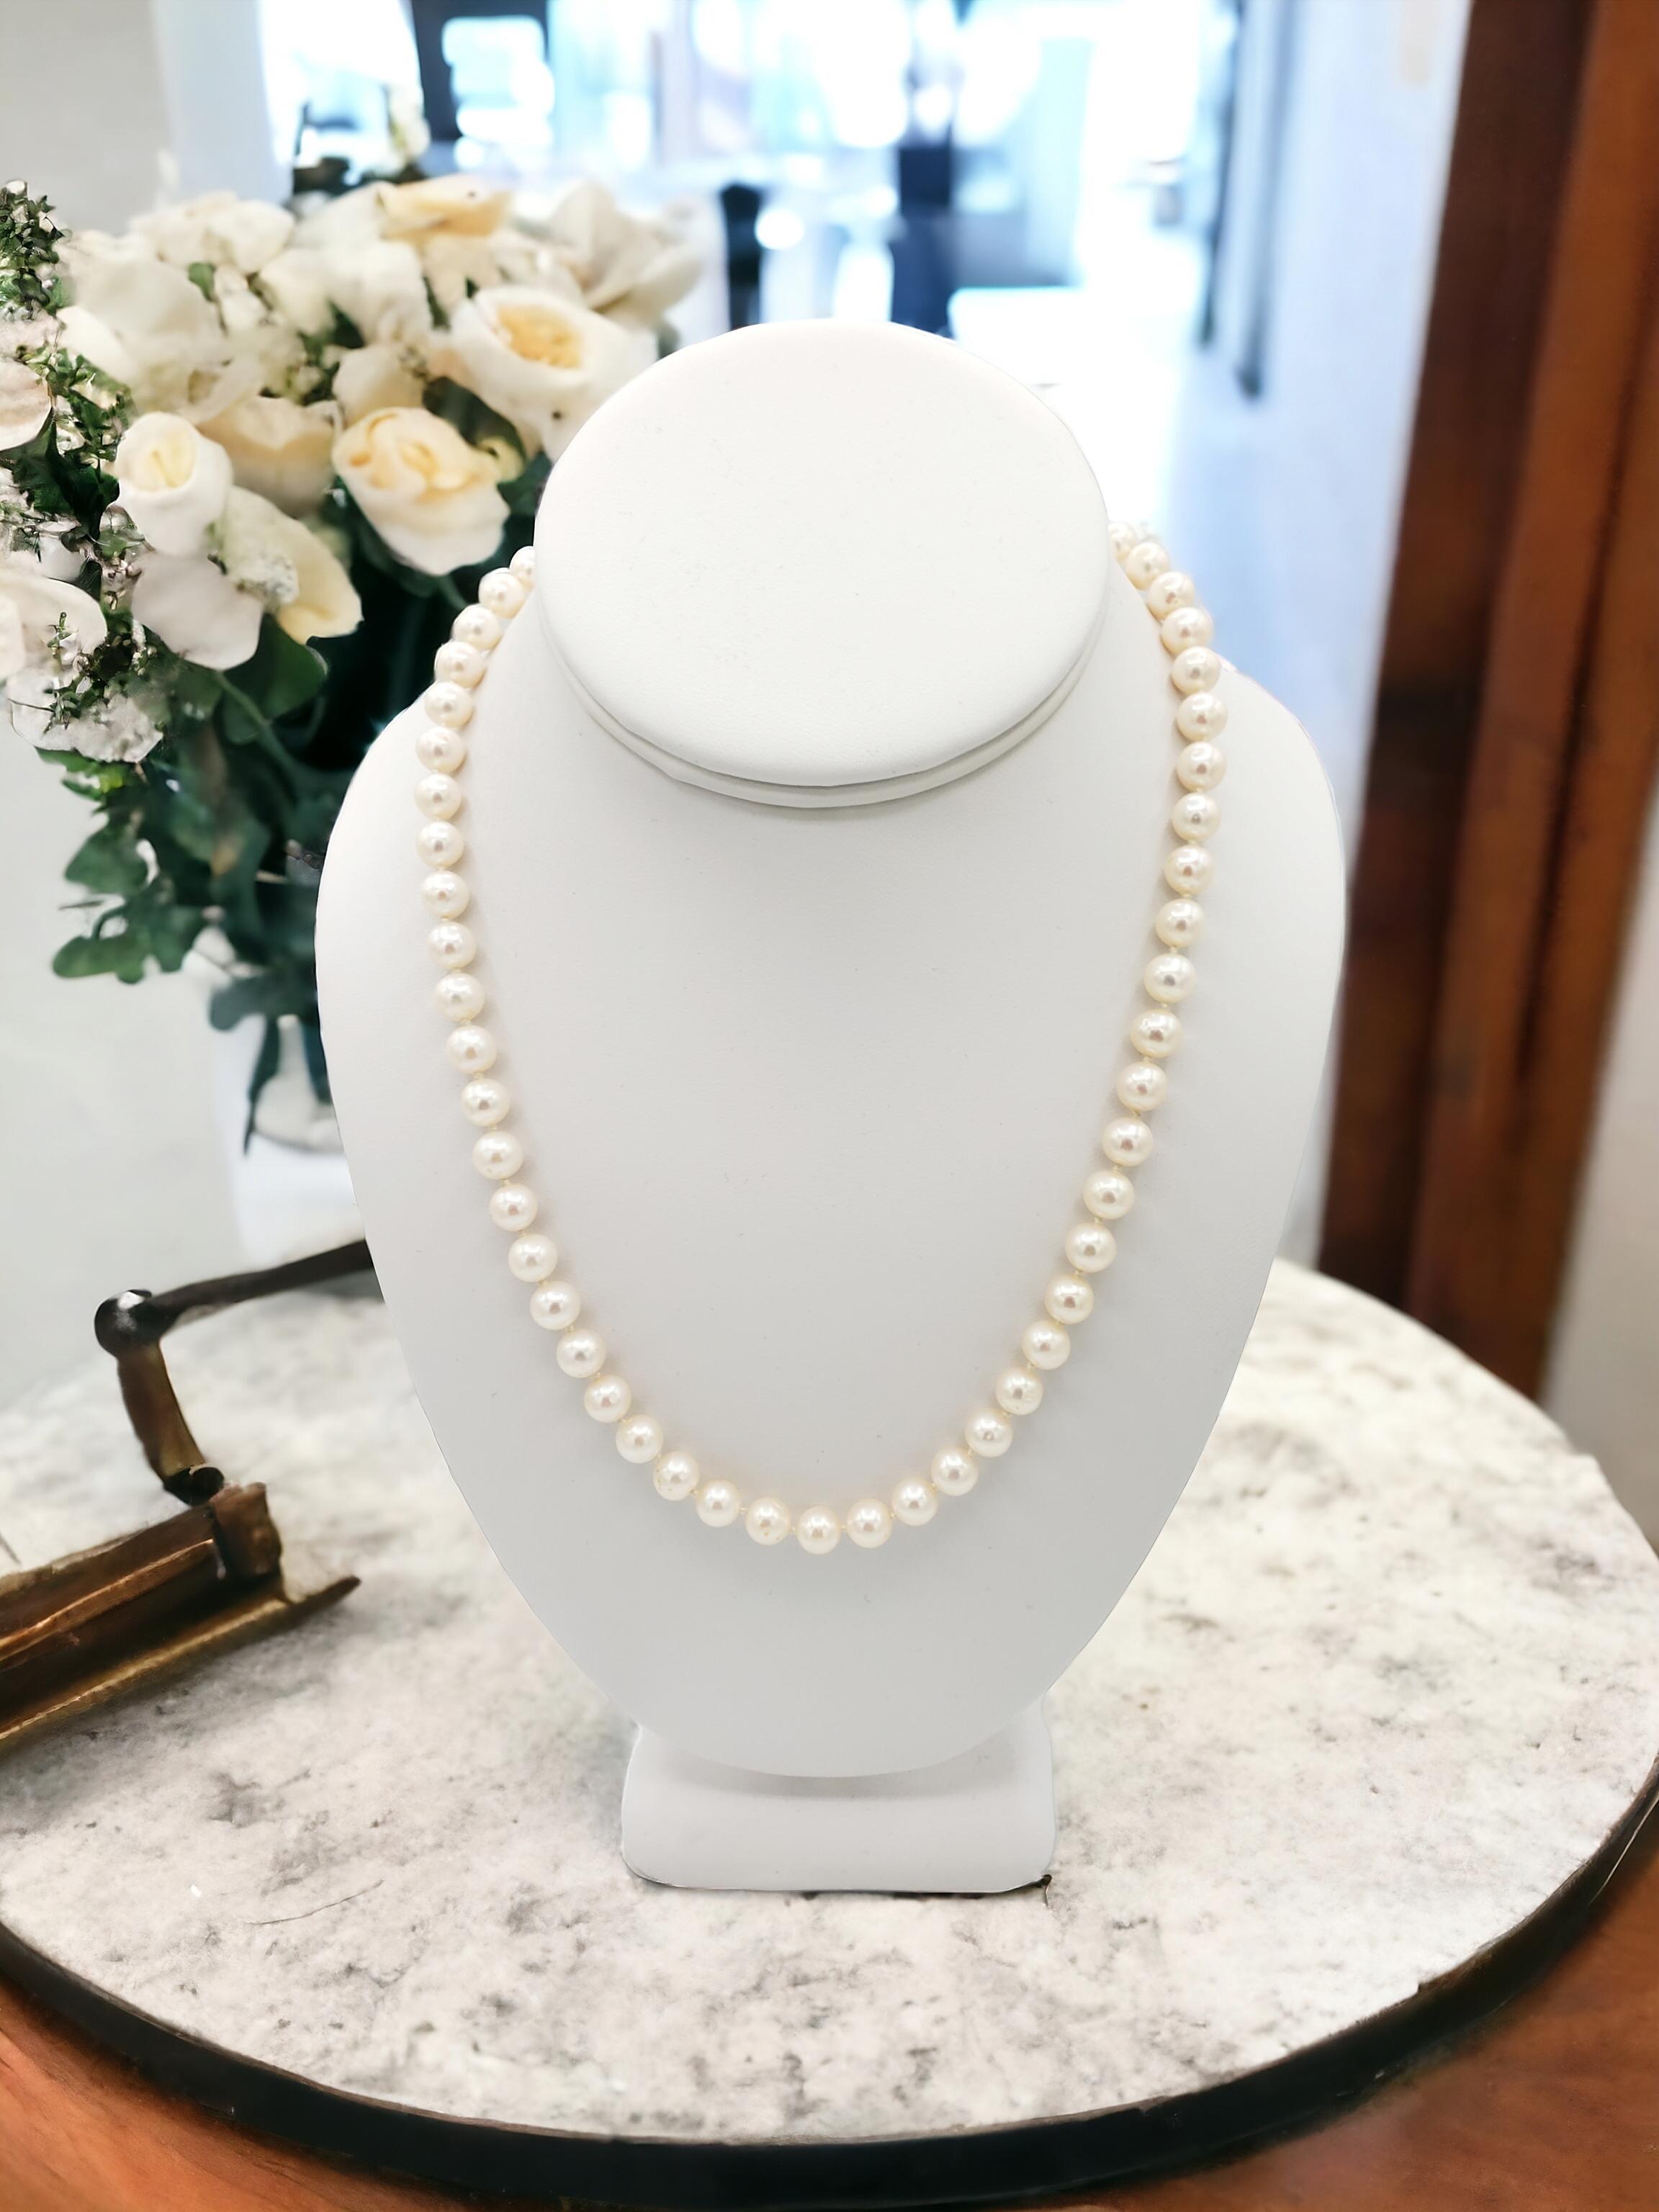 NEW Certified AA+ Quality Japanese Akoya Salt Water White Pearl Necklace For Sale 11